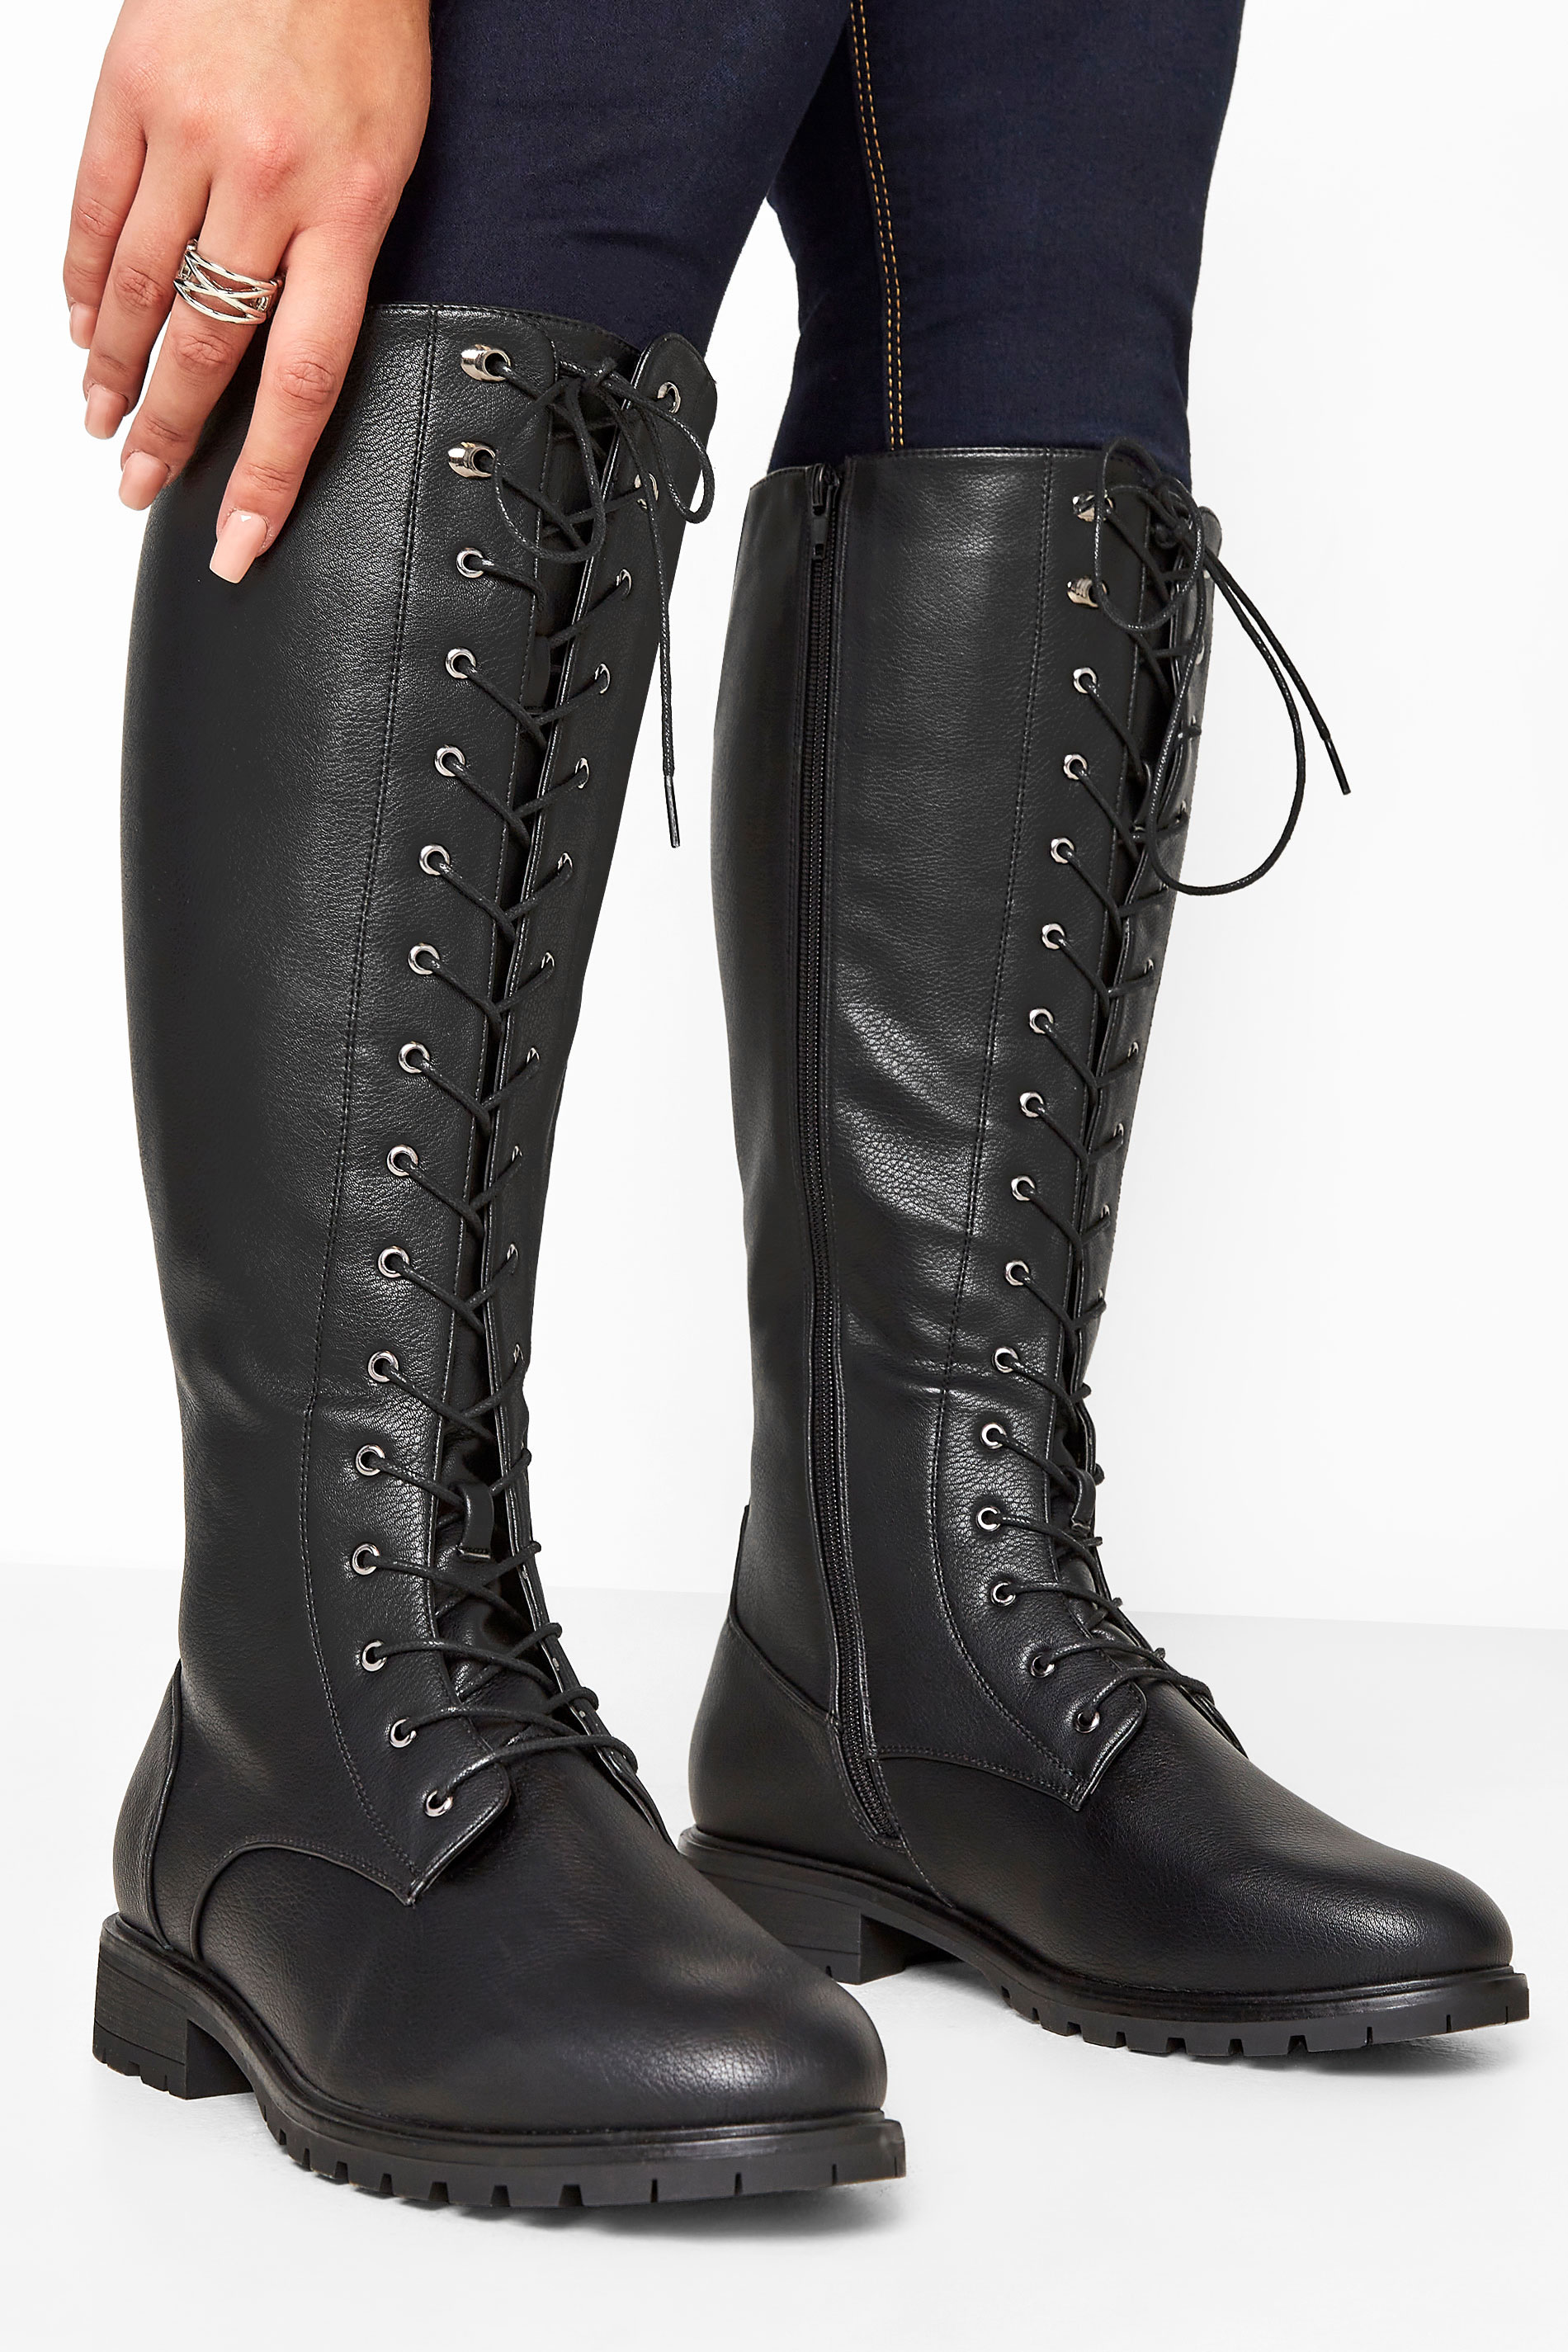 Black Faux Leather Lace Up Knee High Boots In Wide E Fit & Extra Wide EEE Fit | Yours Clothing 1